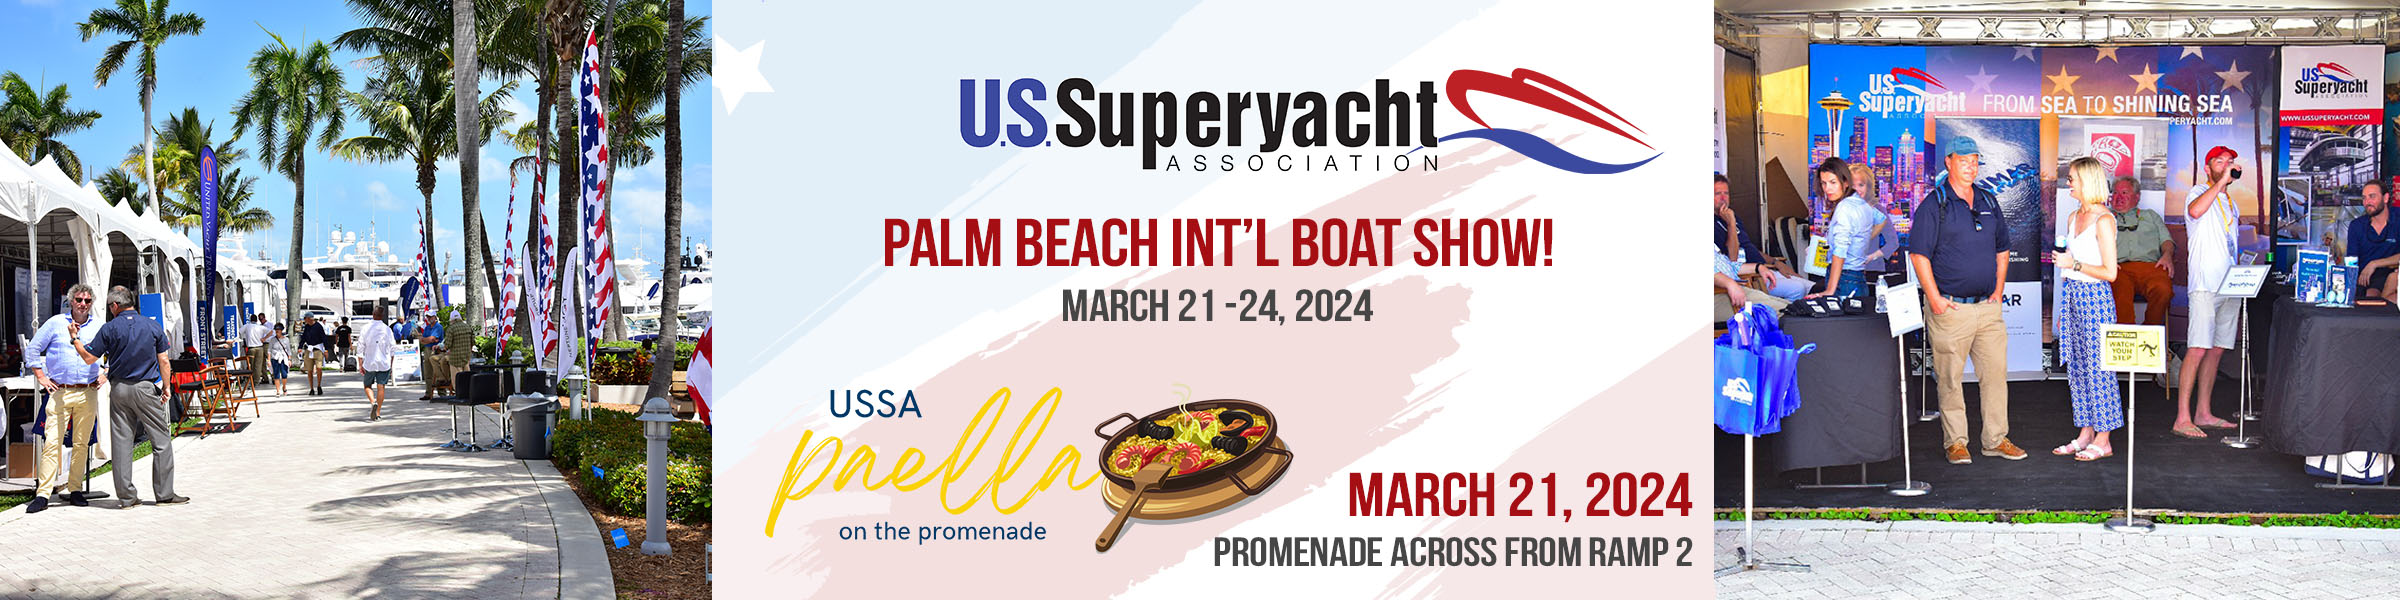 Palm Beach Boat Show header with dates